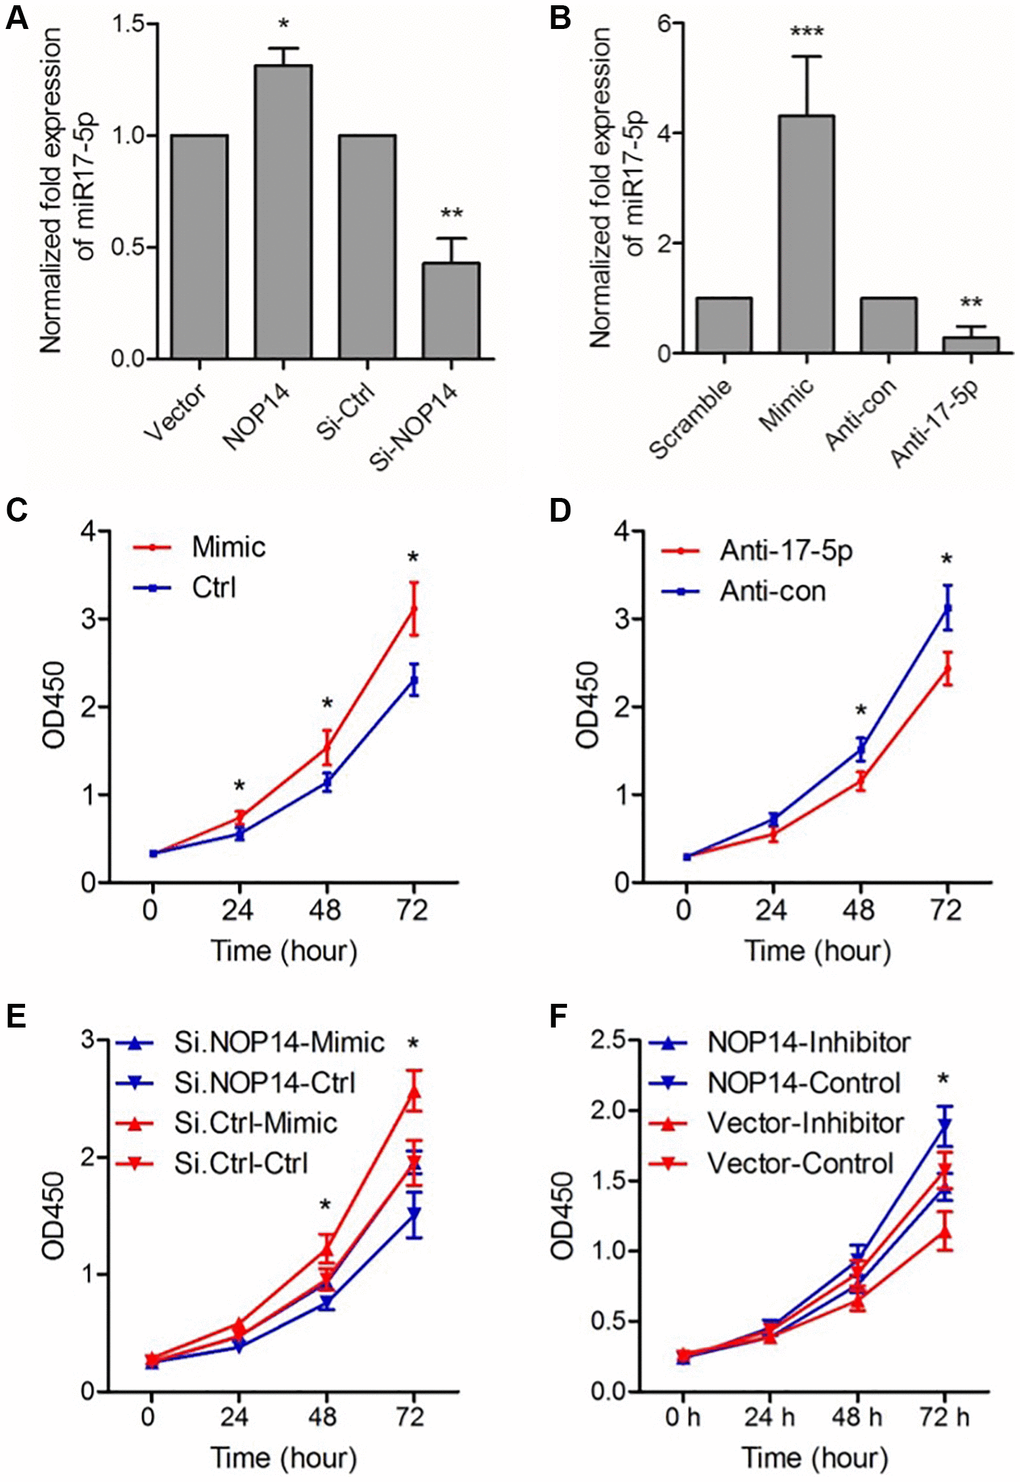 miR17-5p mediates the promotive effect of NOP14 on the proliferation of PANC1 pancreatic cancer cell. (A) Expression level of miR17-5p after up- or downregulation of NOP14, as determined by qRT–PCR. (B) Expression level of miR17-5p after transfection with the miR17-5p analog and control (scramble), inhibitor (anti-17-5p) and control (anti-con), as determined by qRT–PCR. (C) Cell proliferation ability after upregulation of miR17-5p expression by the miR17-5p analog. (D) Cell proliferation ability after downregulation of miR17-5p expression by anti-miR17-5p. (E) Cell proliferation ability after downregulation of NOP14 and upregulation of miR17-5p. (F) Cell proliferation ability after upregulation of NOP14 and downregulation of miR17-5p. *P **P ***P 